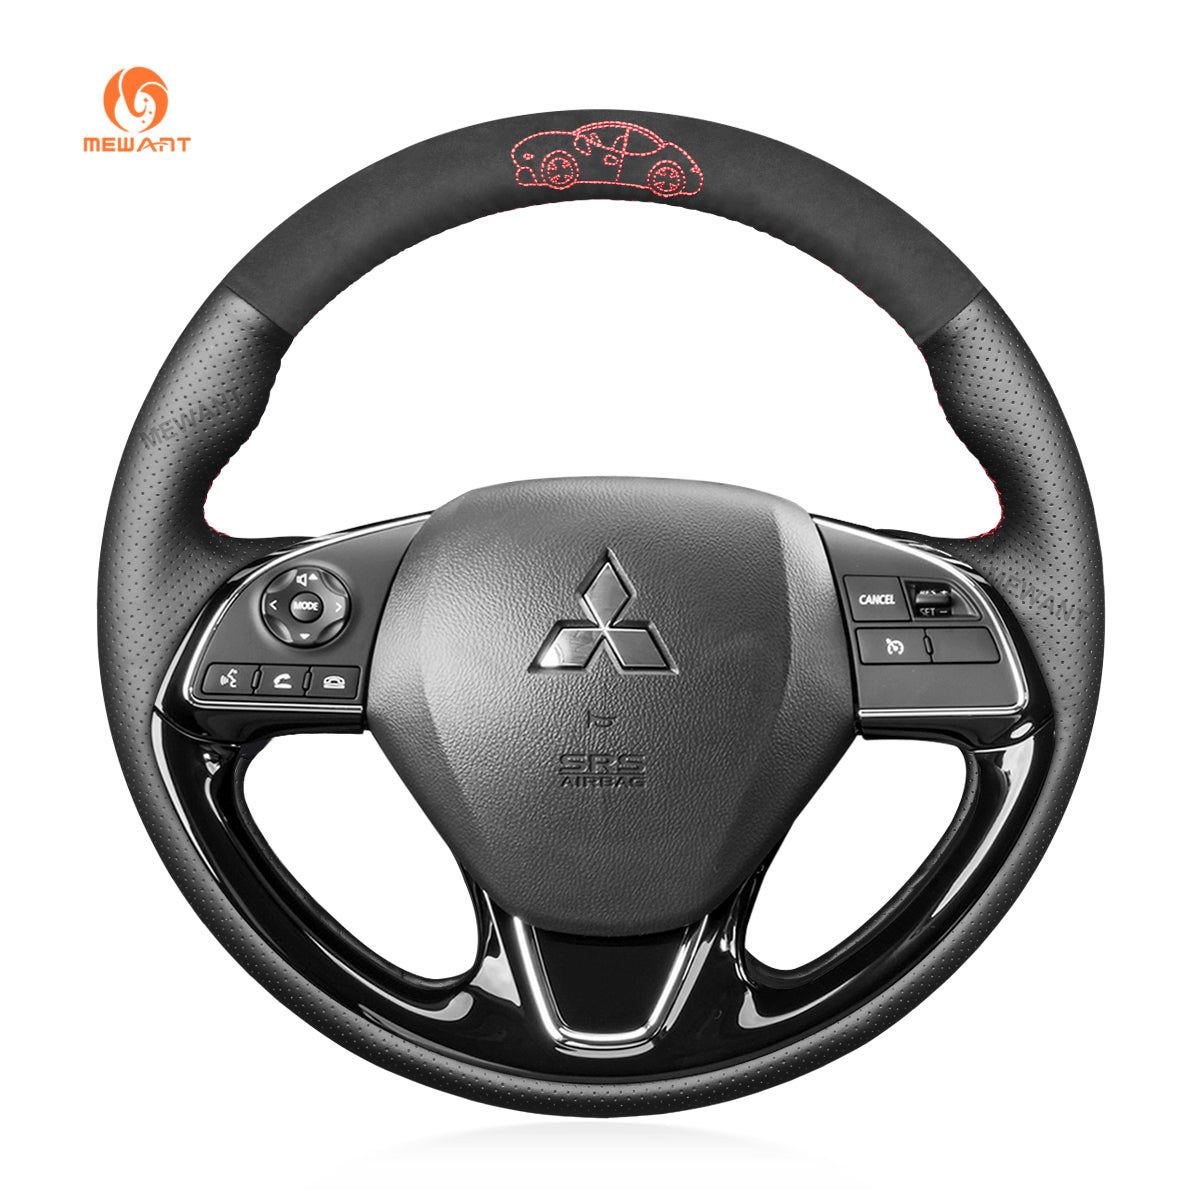 Car Steering Wheel Cover for Mitsubishi ASX Outlander Mirage Eclipse (Cross)